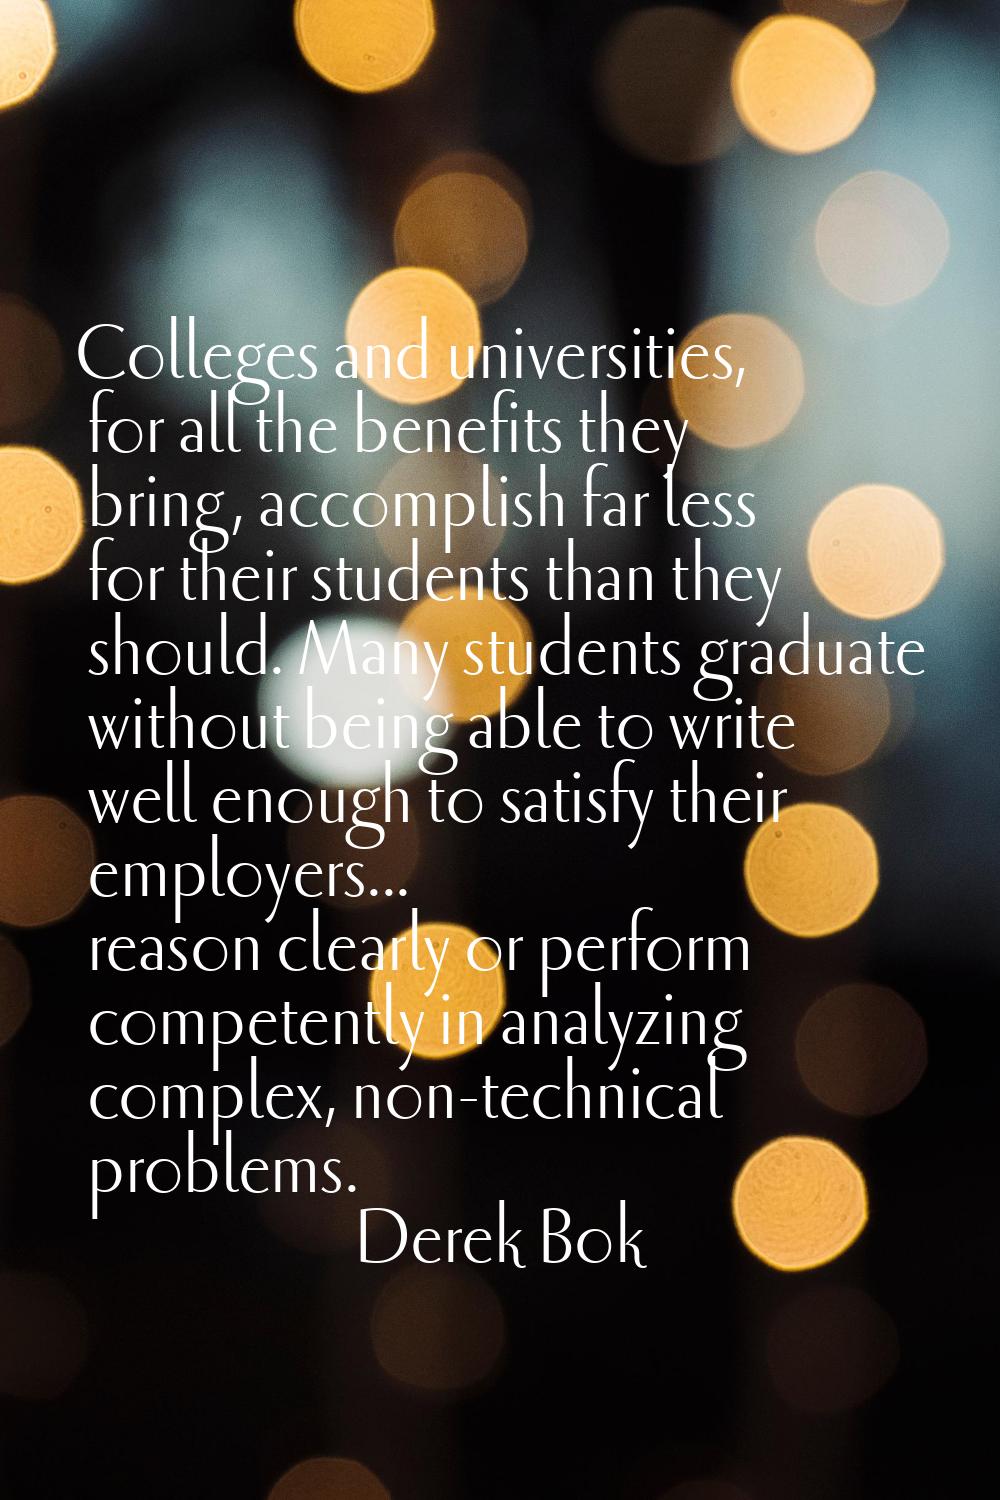 Colleges and universities, for all the benefits they bring, accomplish far less for their students 